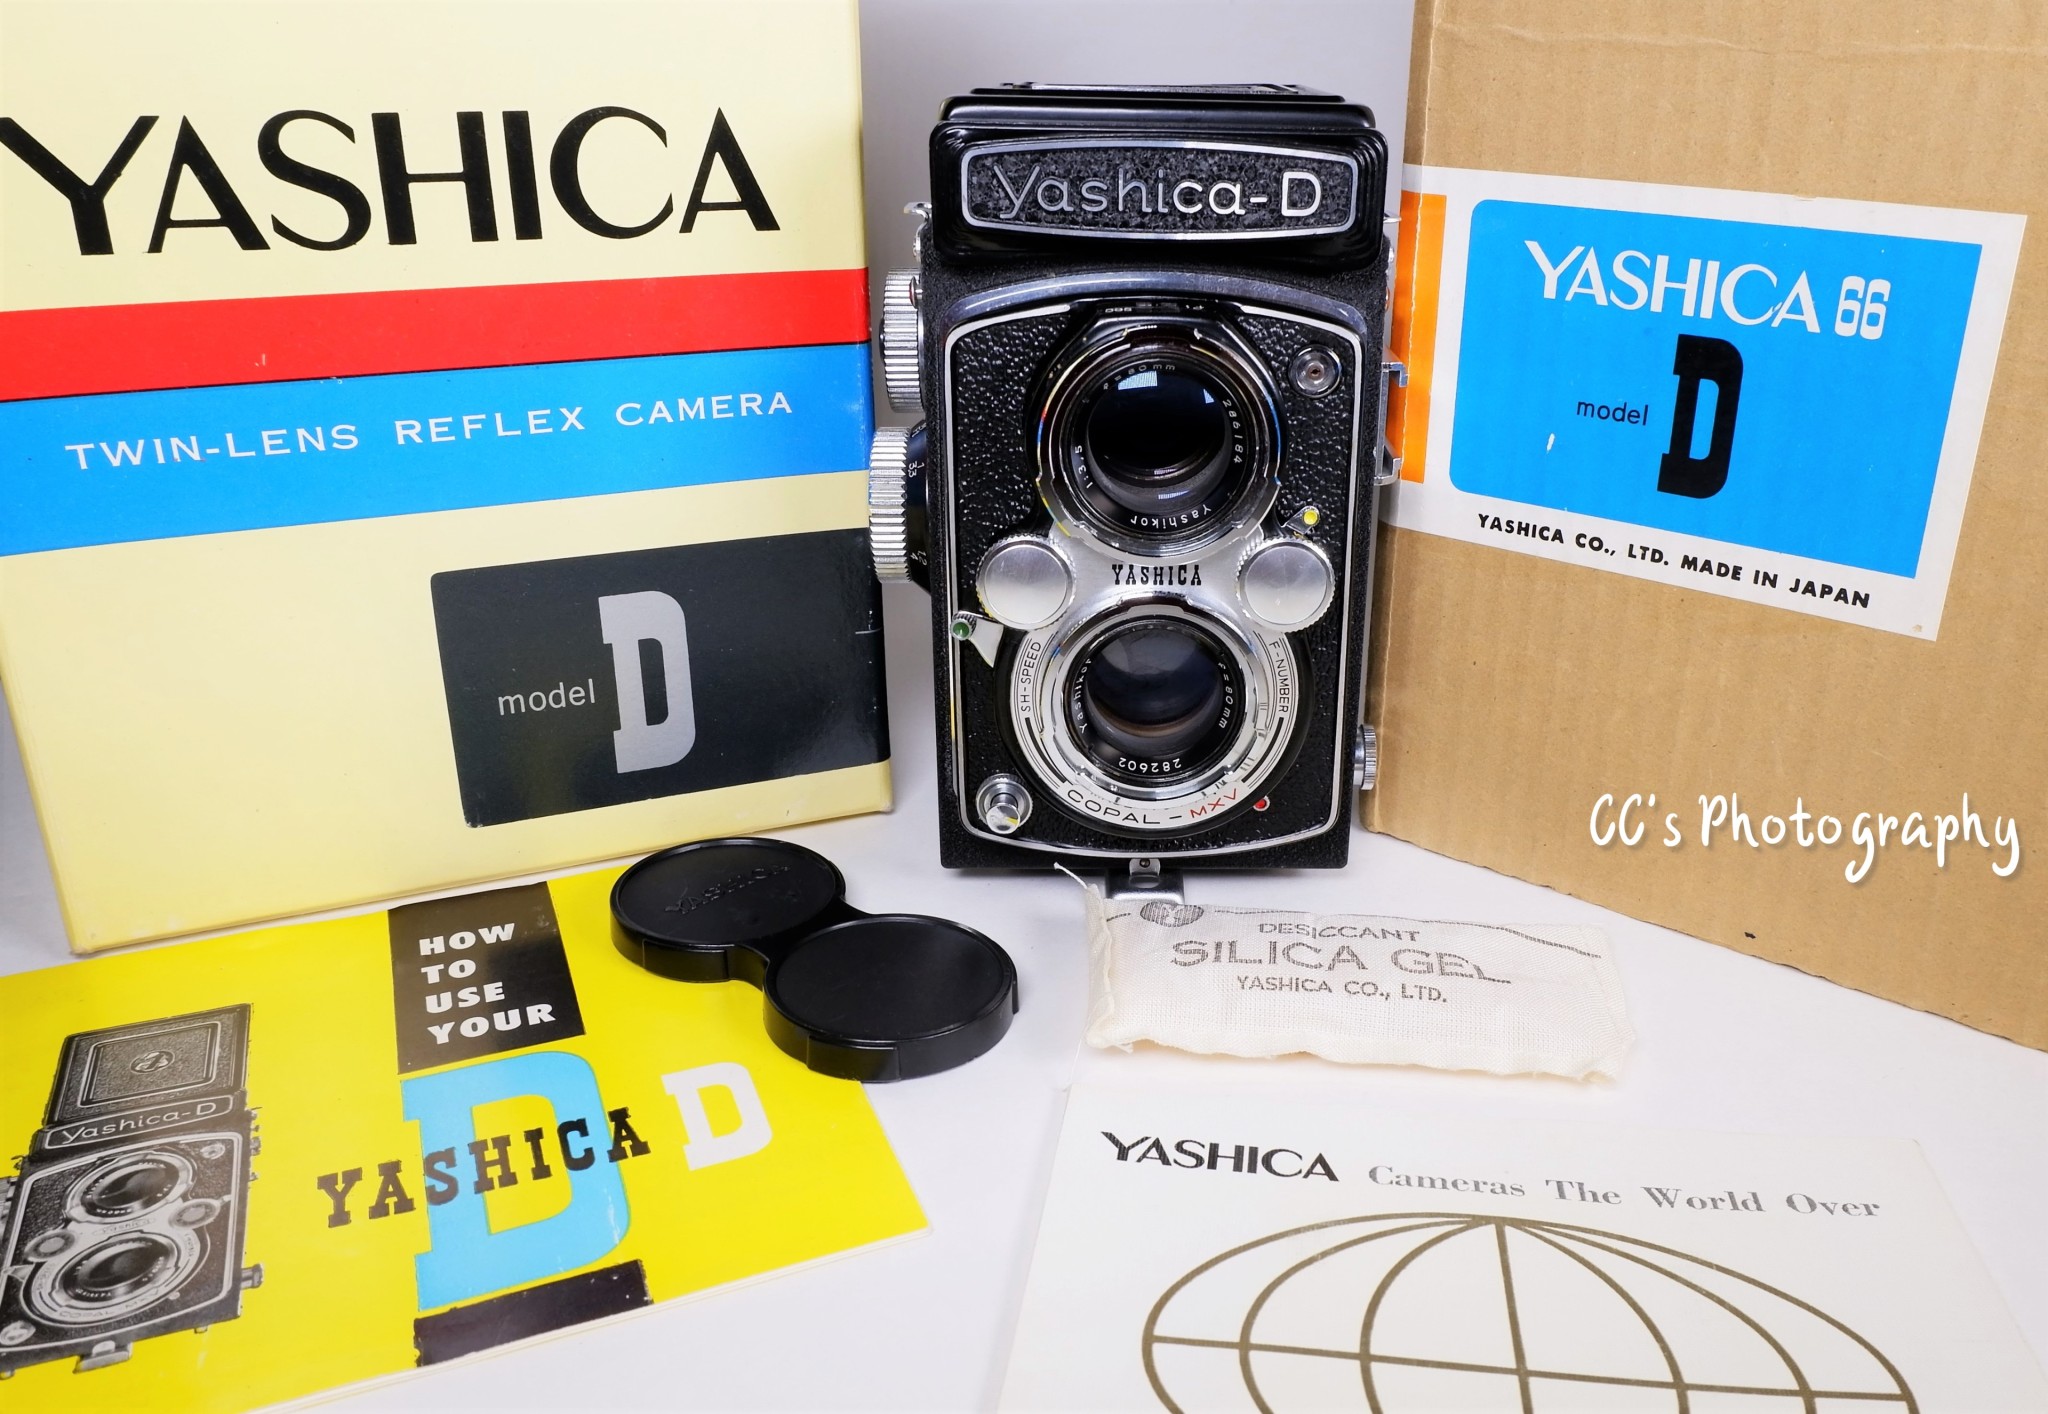 Best Yashica ever!